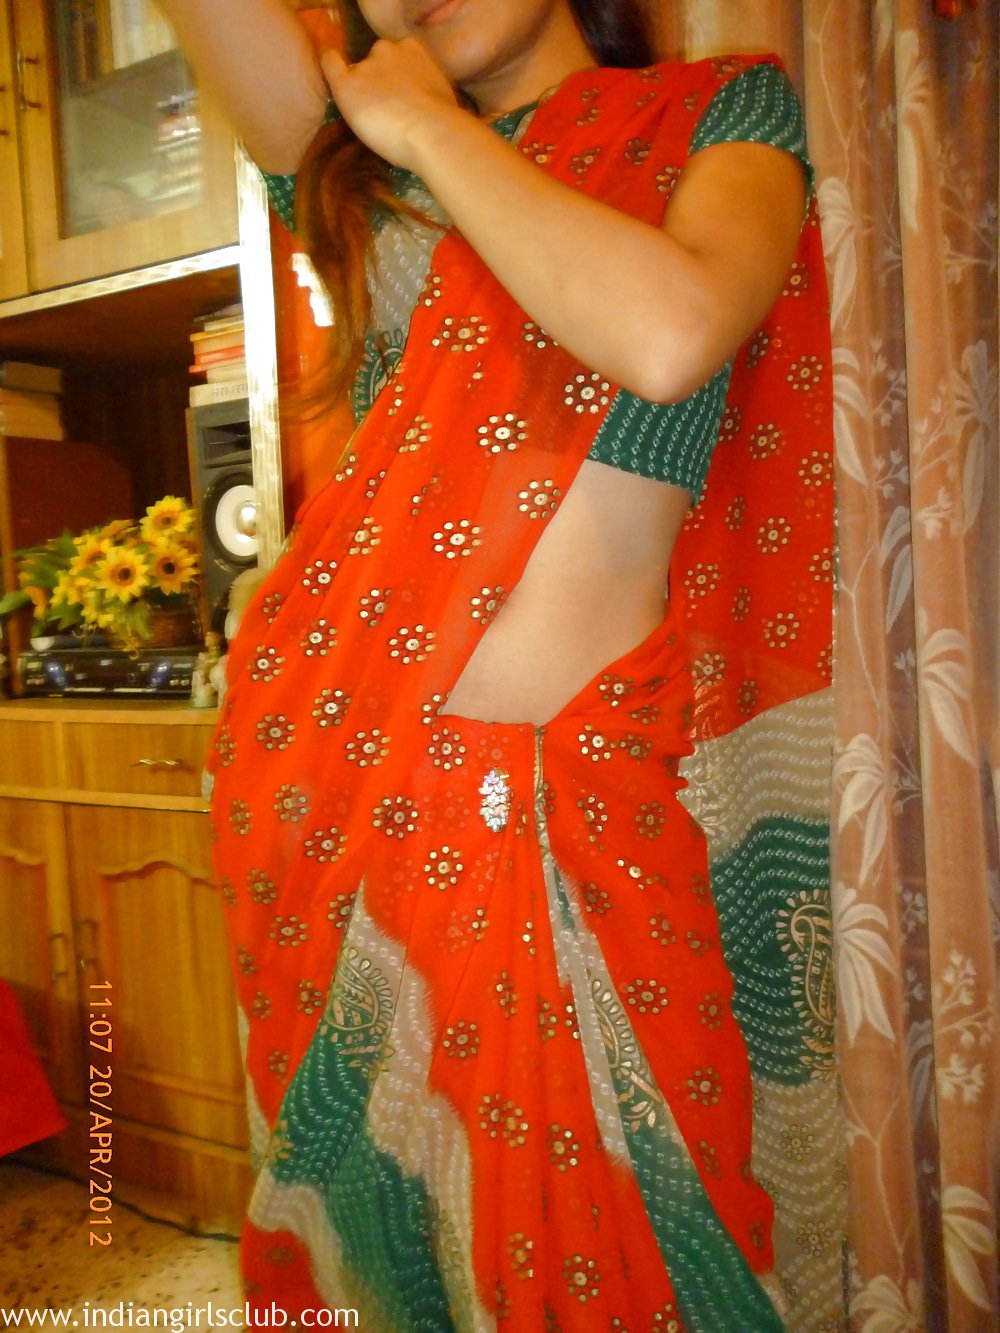 Sex Photos Of Indian Wife In Saree Getting Naked In Bedroom